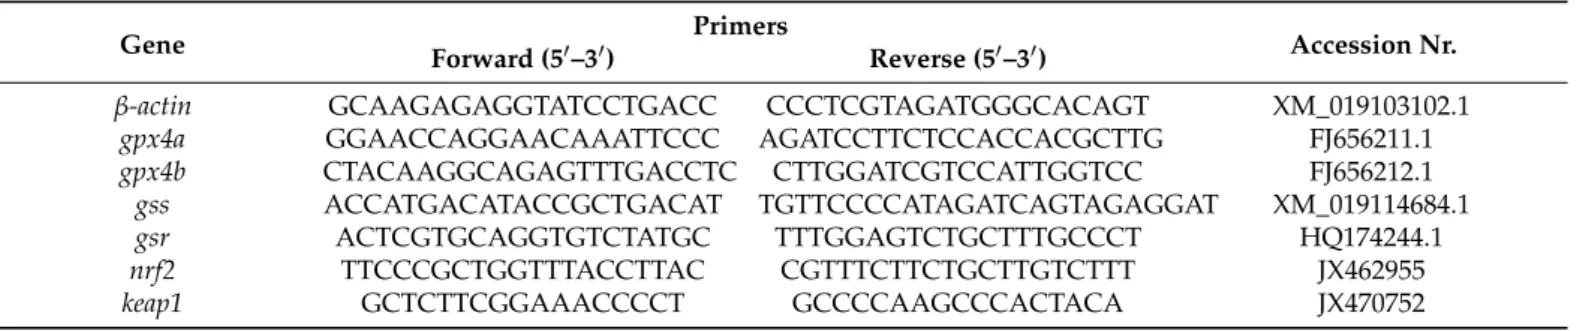 Table 6. Primers of endogenous control (β-actin) and target (gpx4a, gpx4b, gss, gsr, nrf2 and keap1) genes.